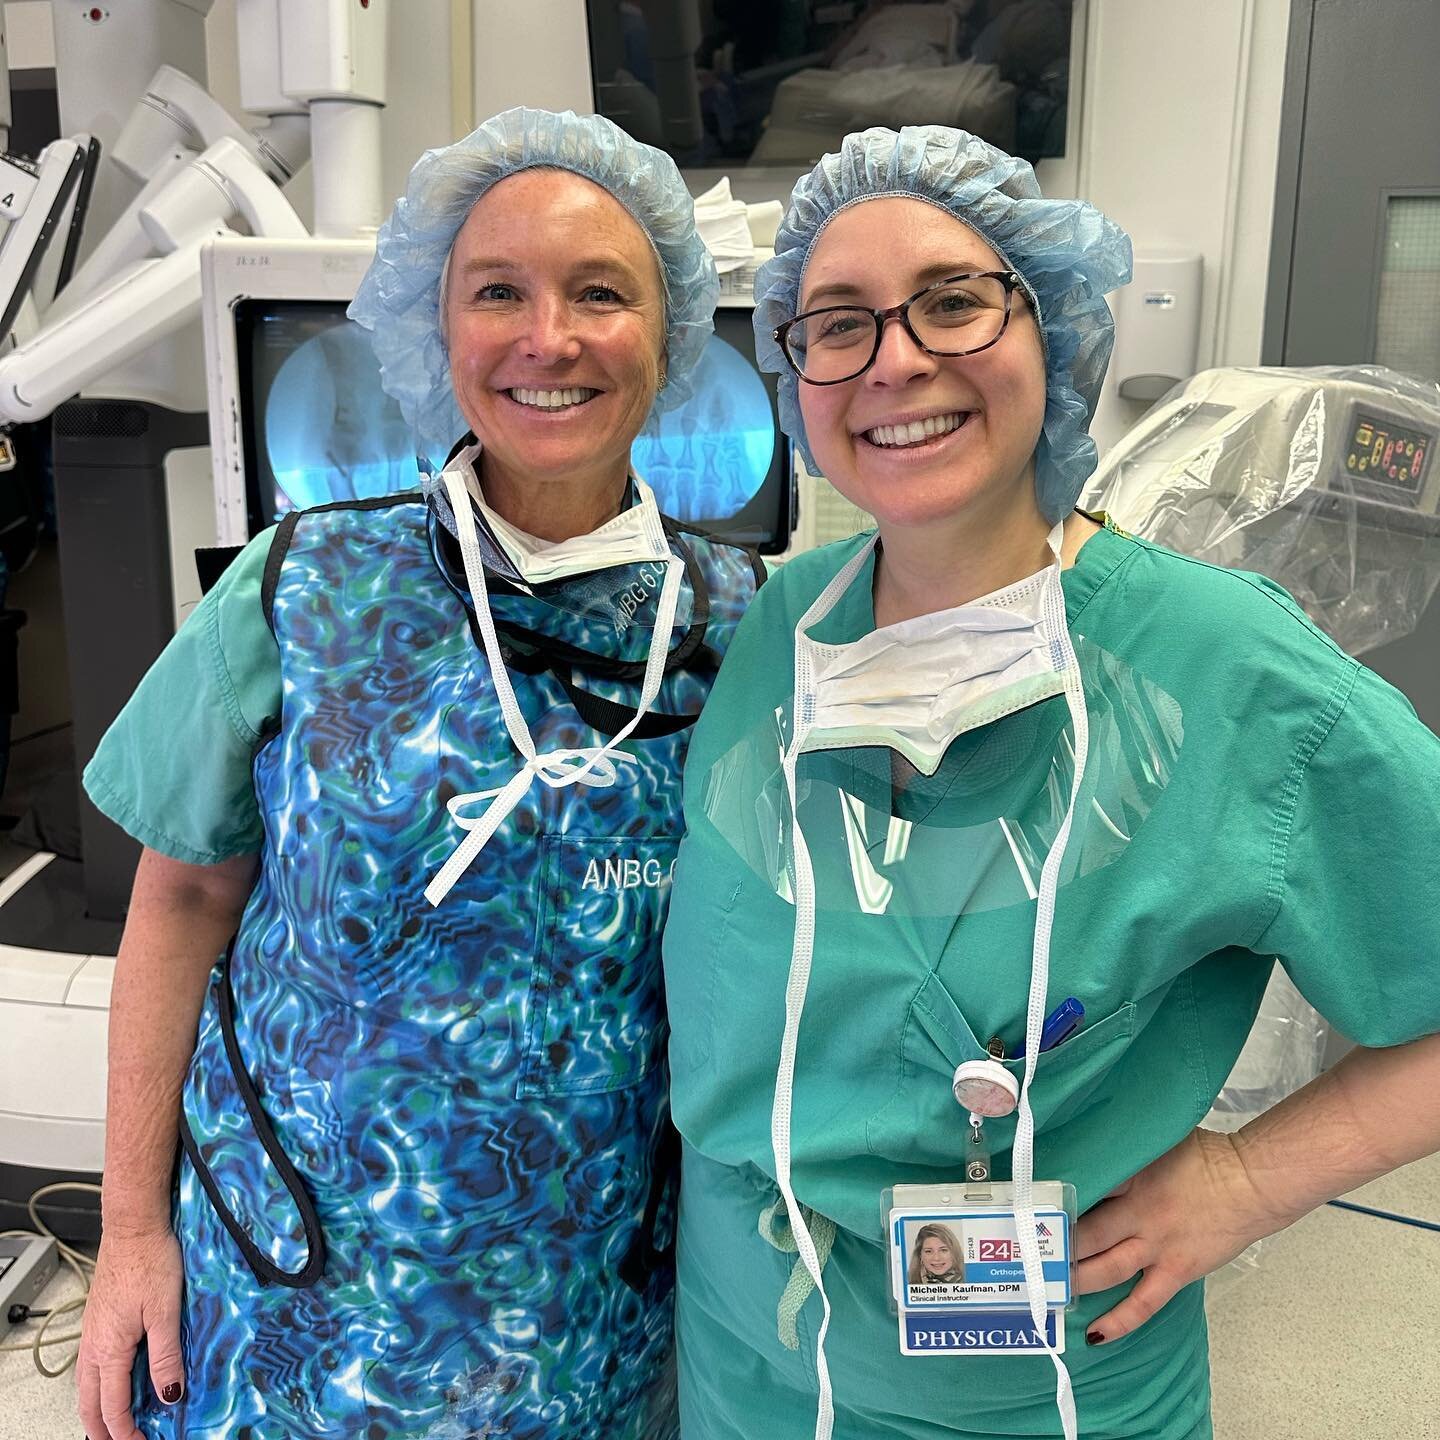 Scrubbing in together and celebrating 2 years with Dr. Kaufman! We are so grateful for the dedication and expertise that she has brought to our practice! 🌟🌟🦶🏼

#podiatry #footsurgeon #womensupportingwomen